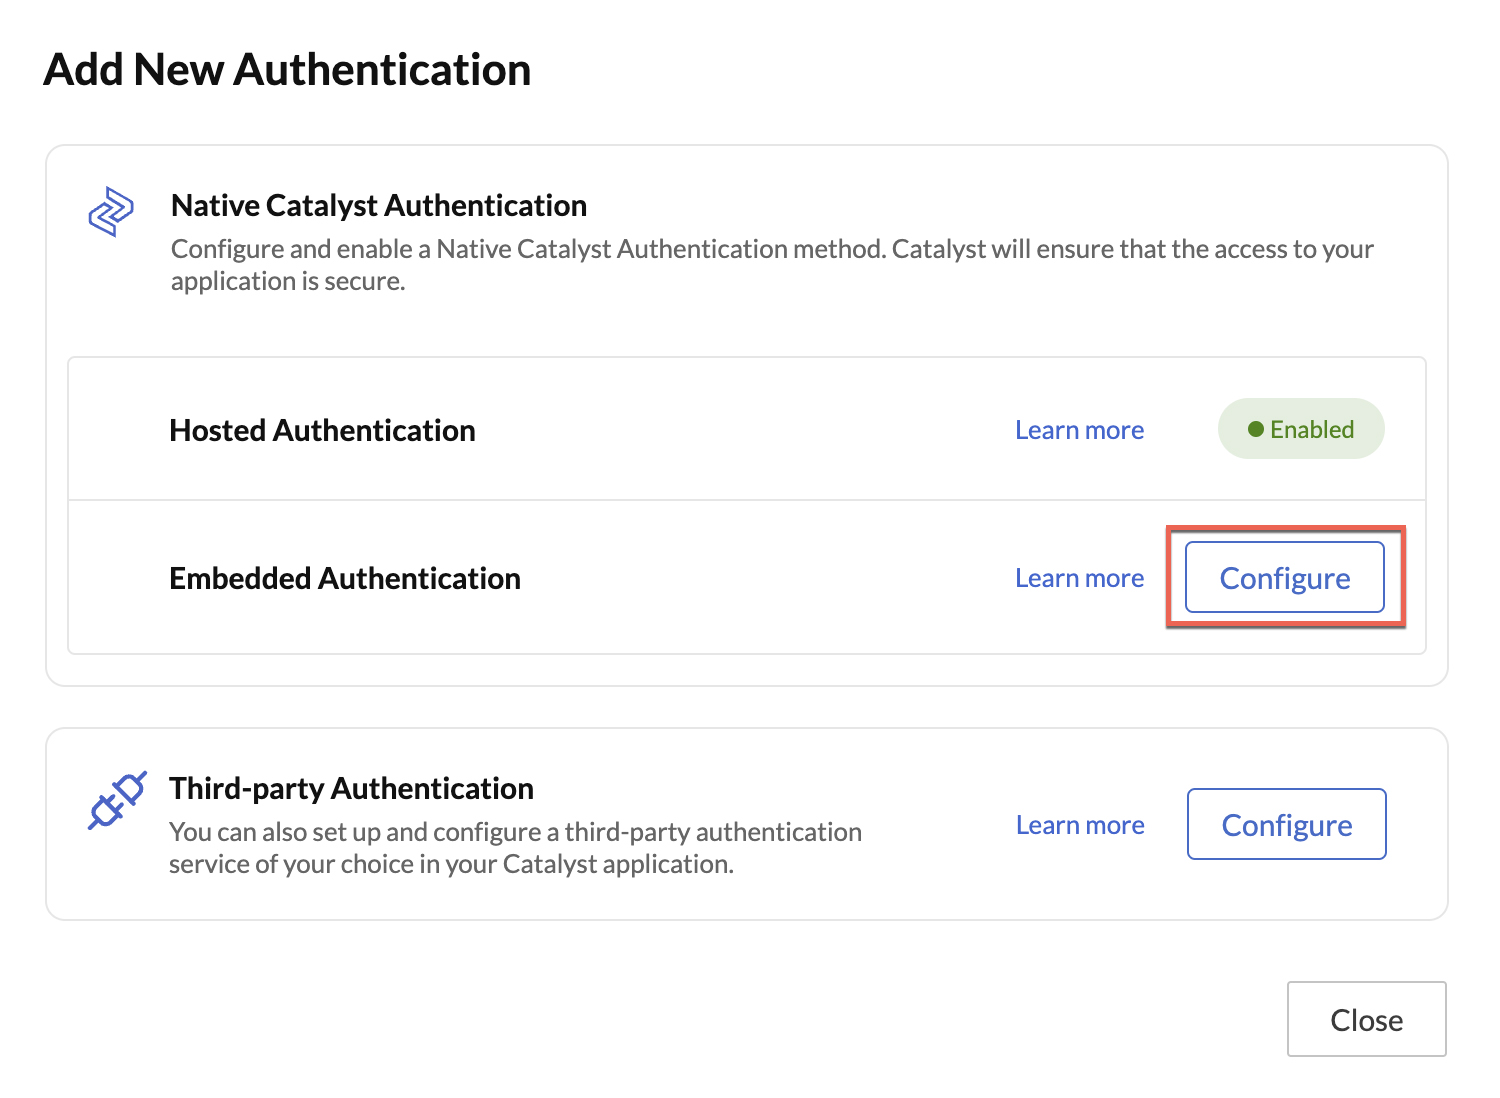 cloud-scale_auth_add-authenticaiton_enabled